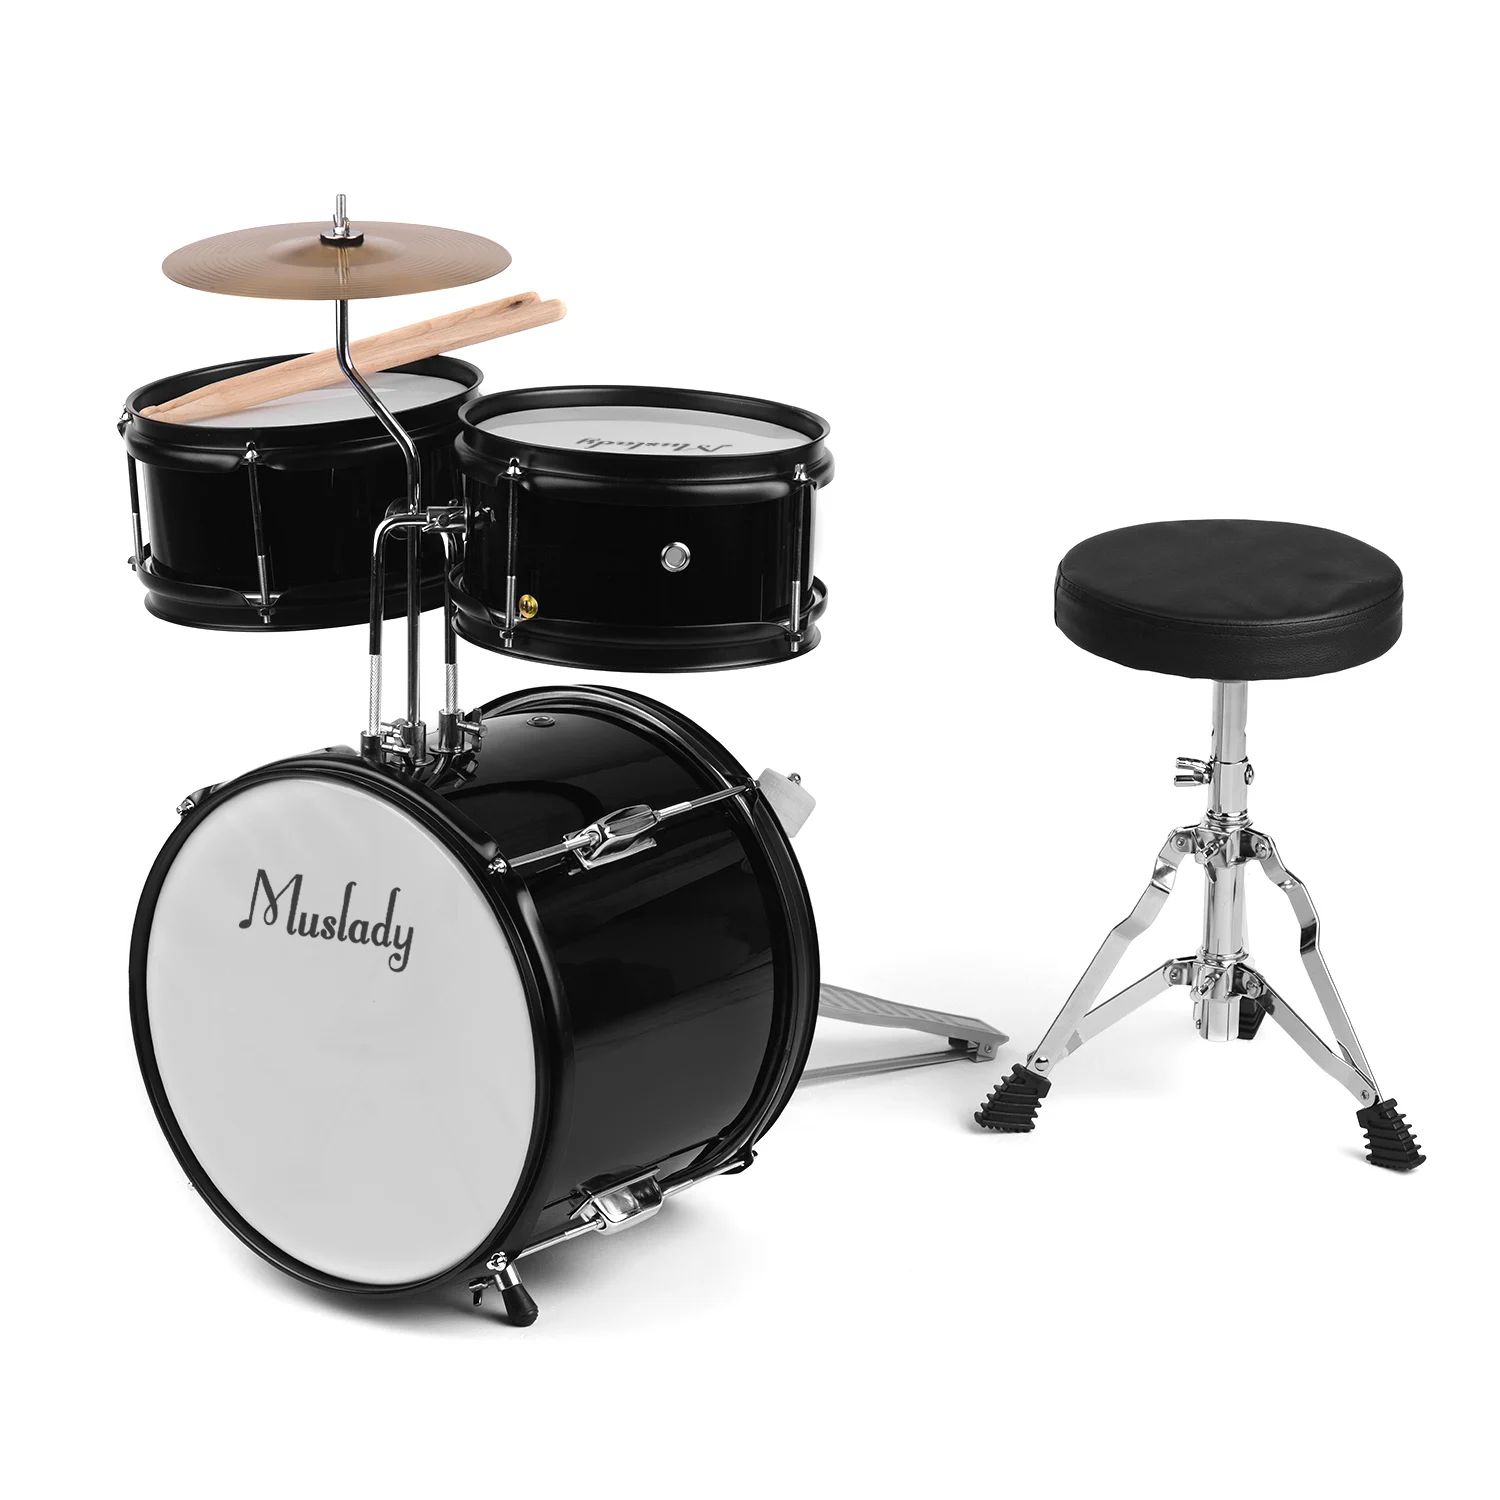 

Kids Children Junior Beginners 3-Piece Drum Set Drums Kit Percussion Musical Instrument with Cymbal Drumsticks Adjustable Stool